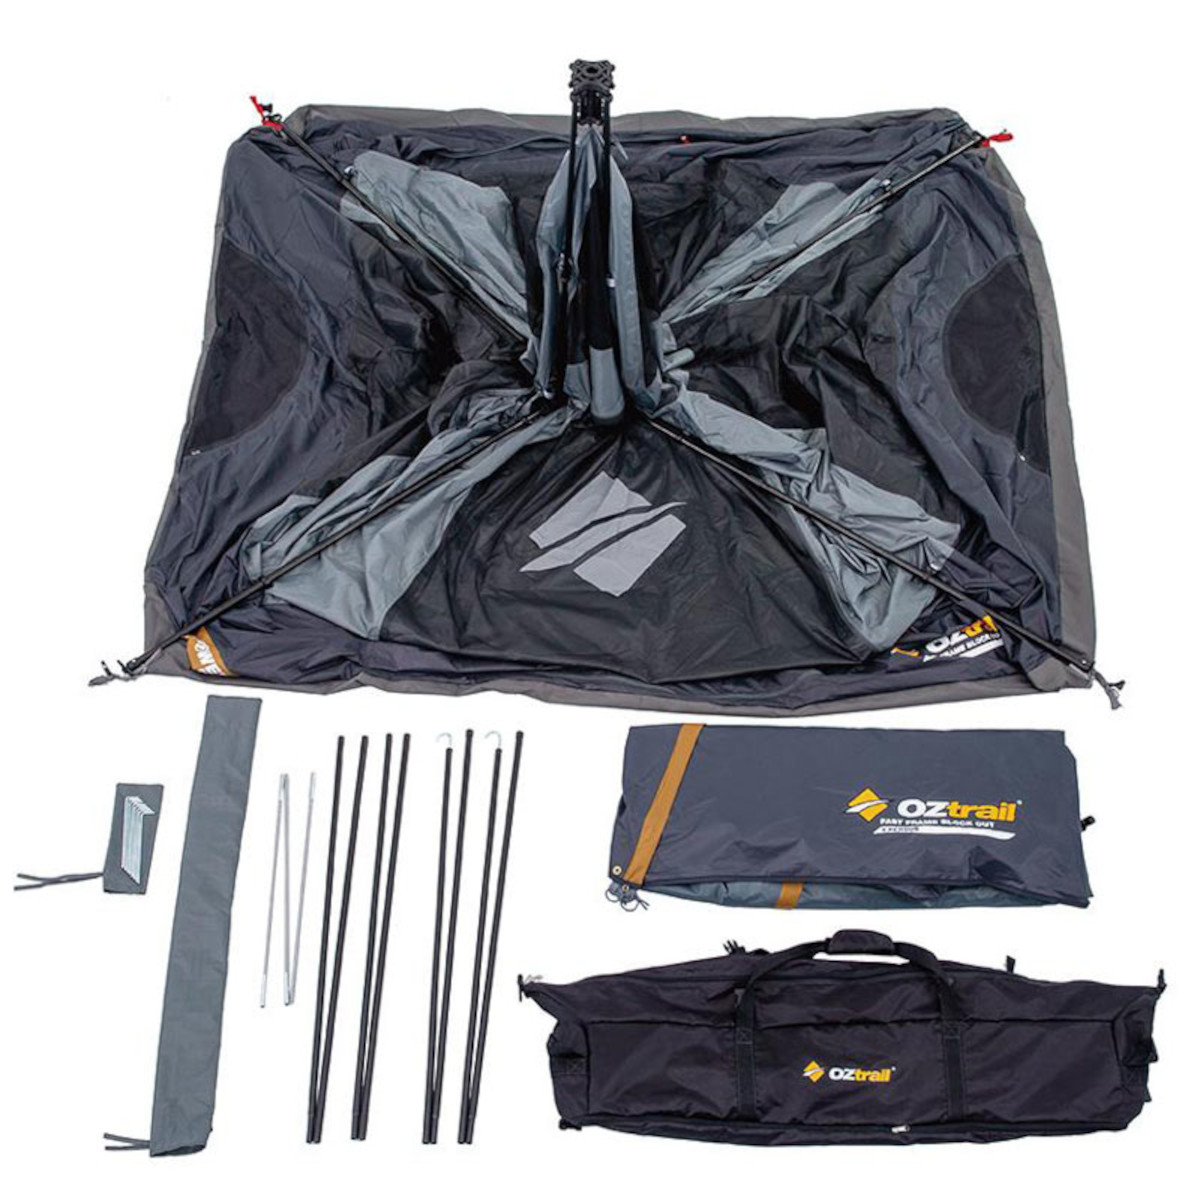 Oztrail Fast Frame Blockout 4P-camp tent